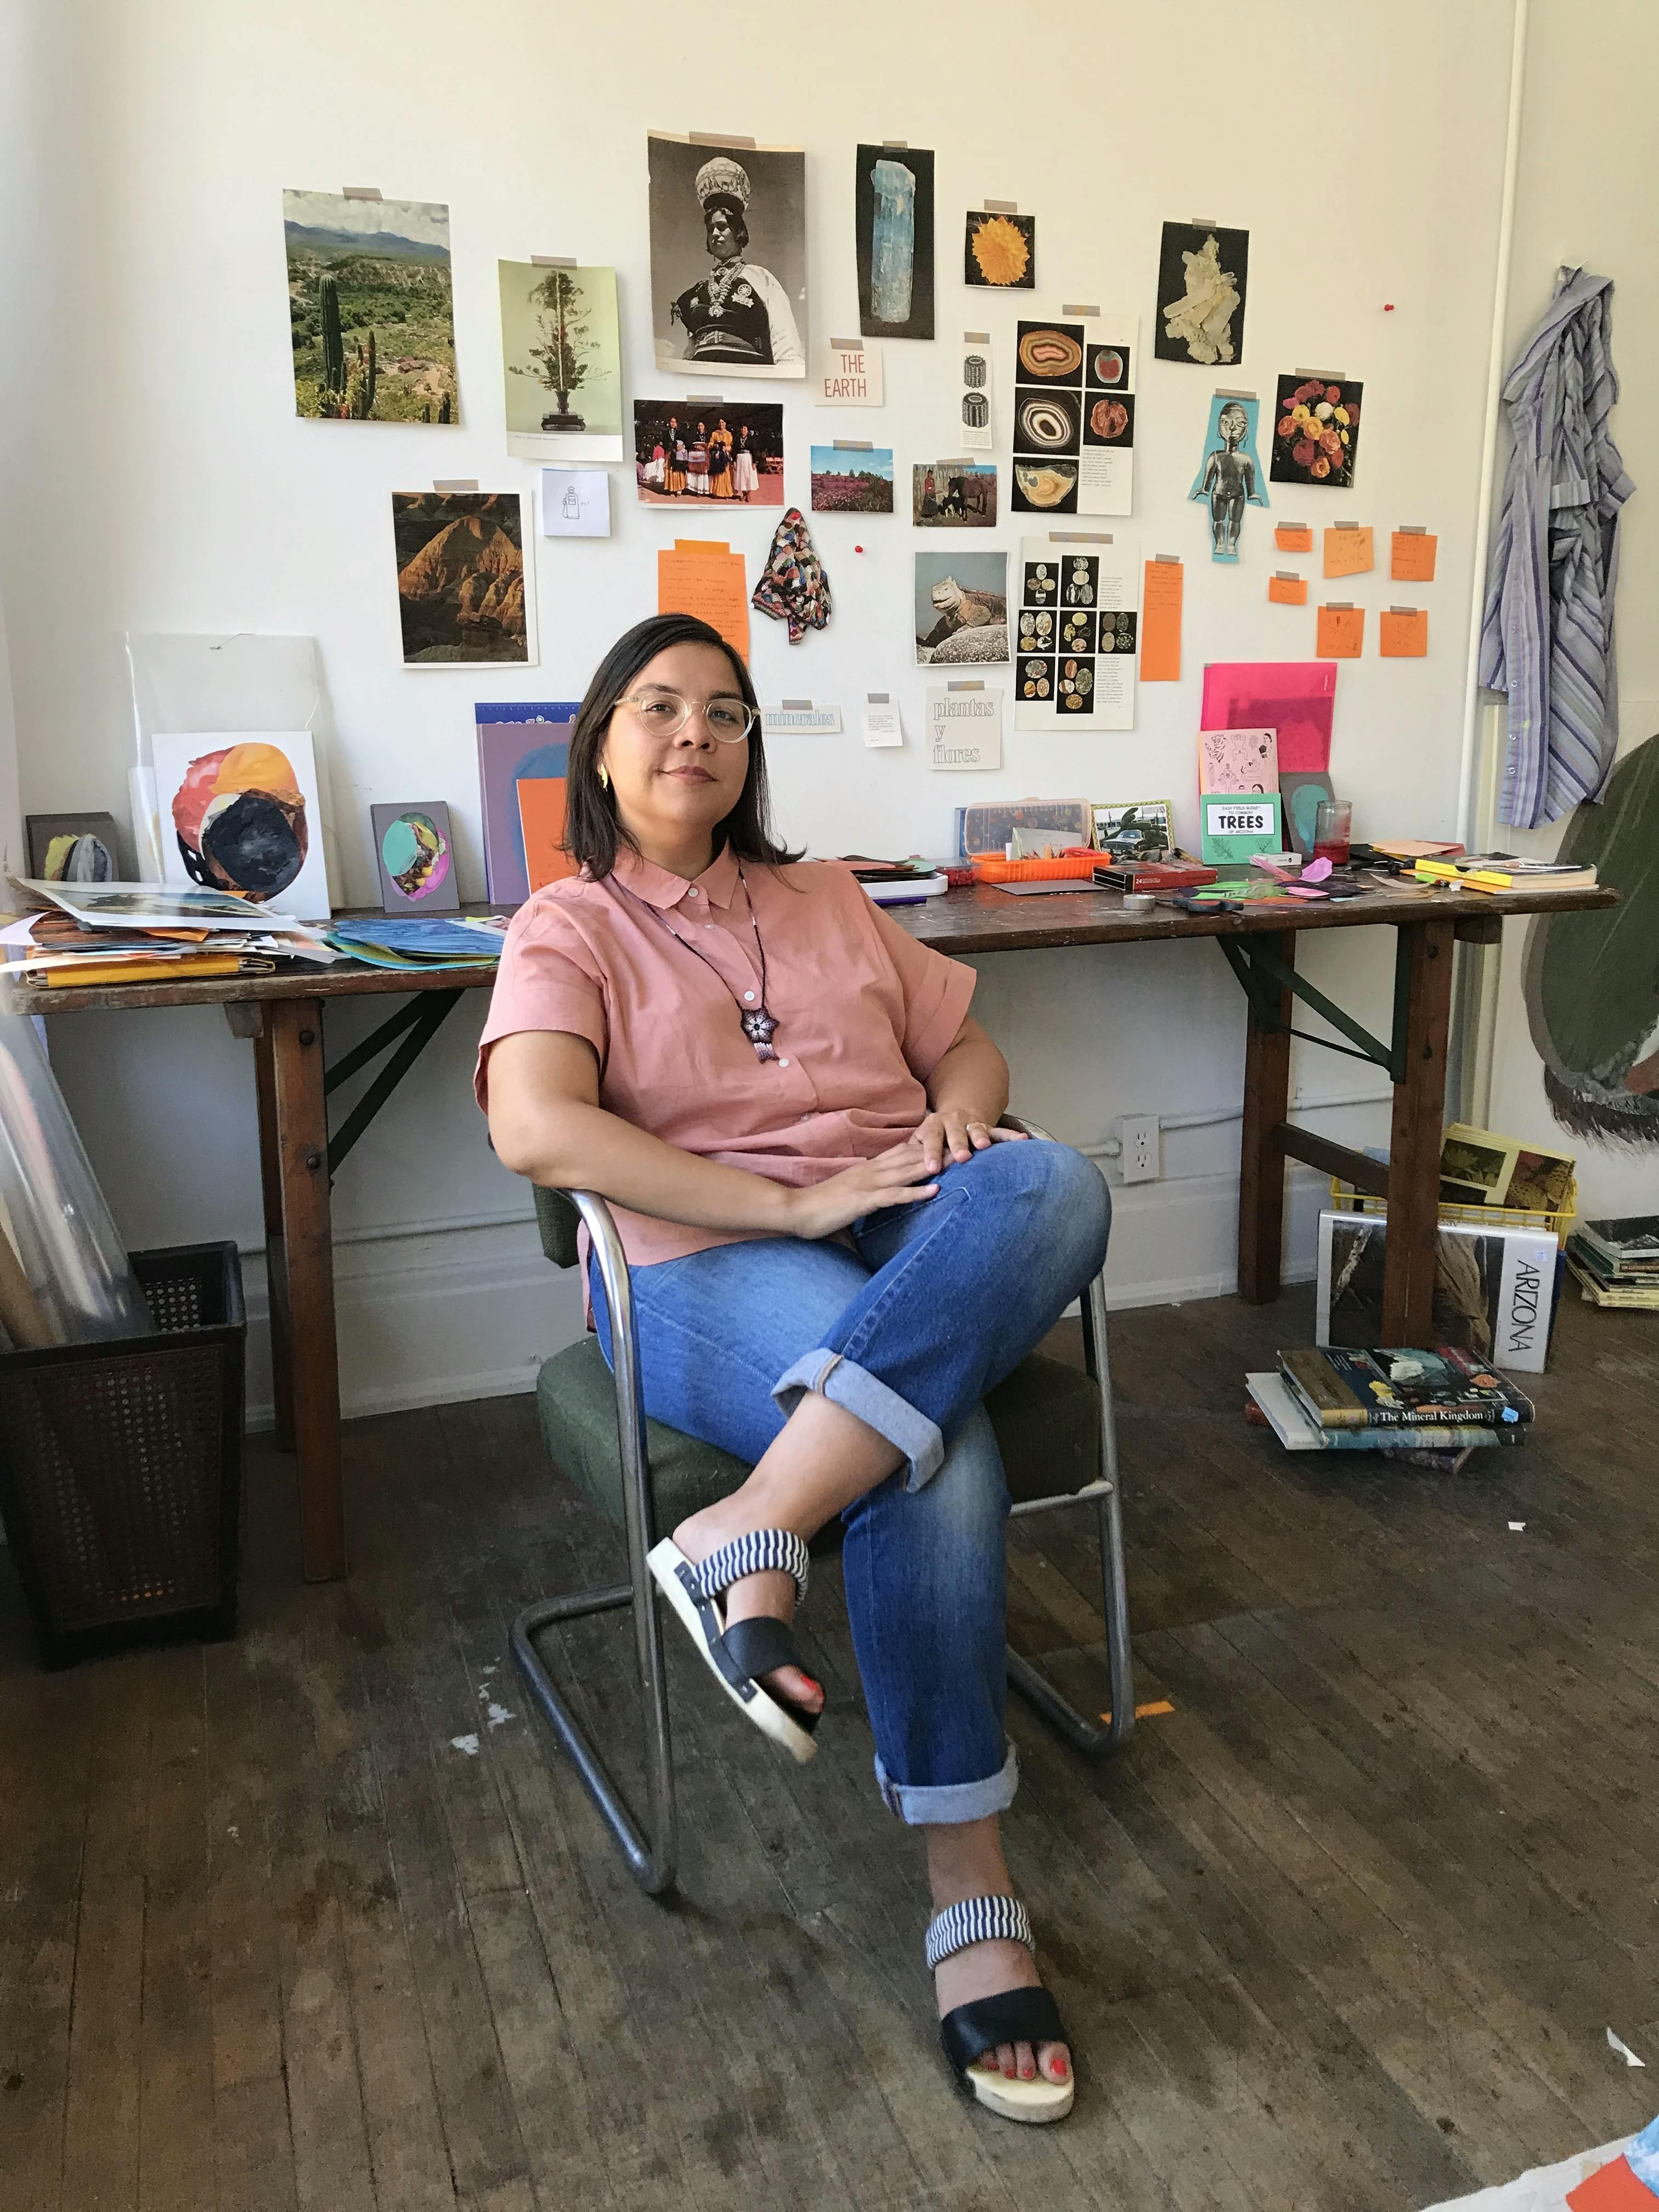 Artist Xochi Solis sitting in her studio surrounded by mixed-media collages and source material in her studio.